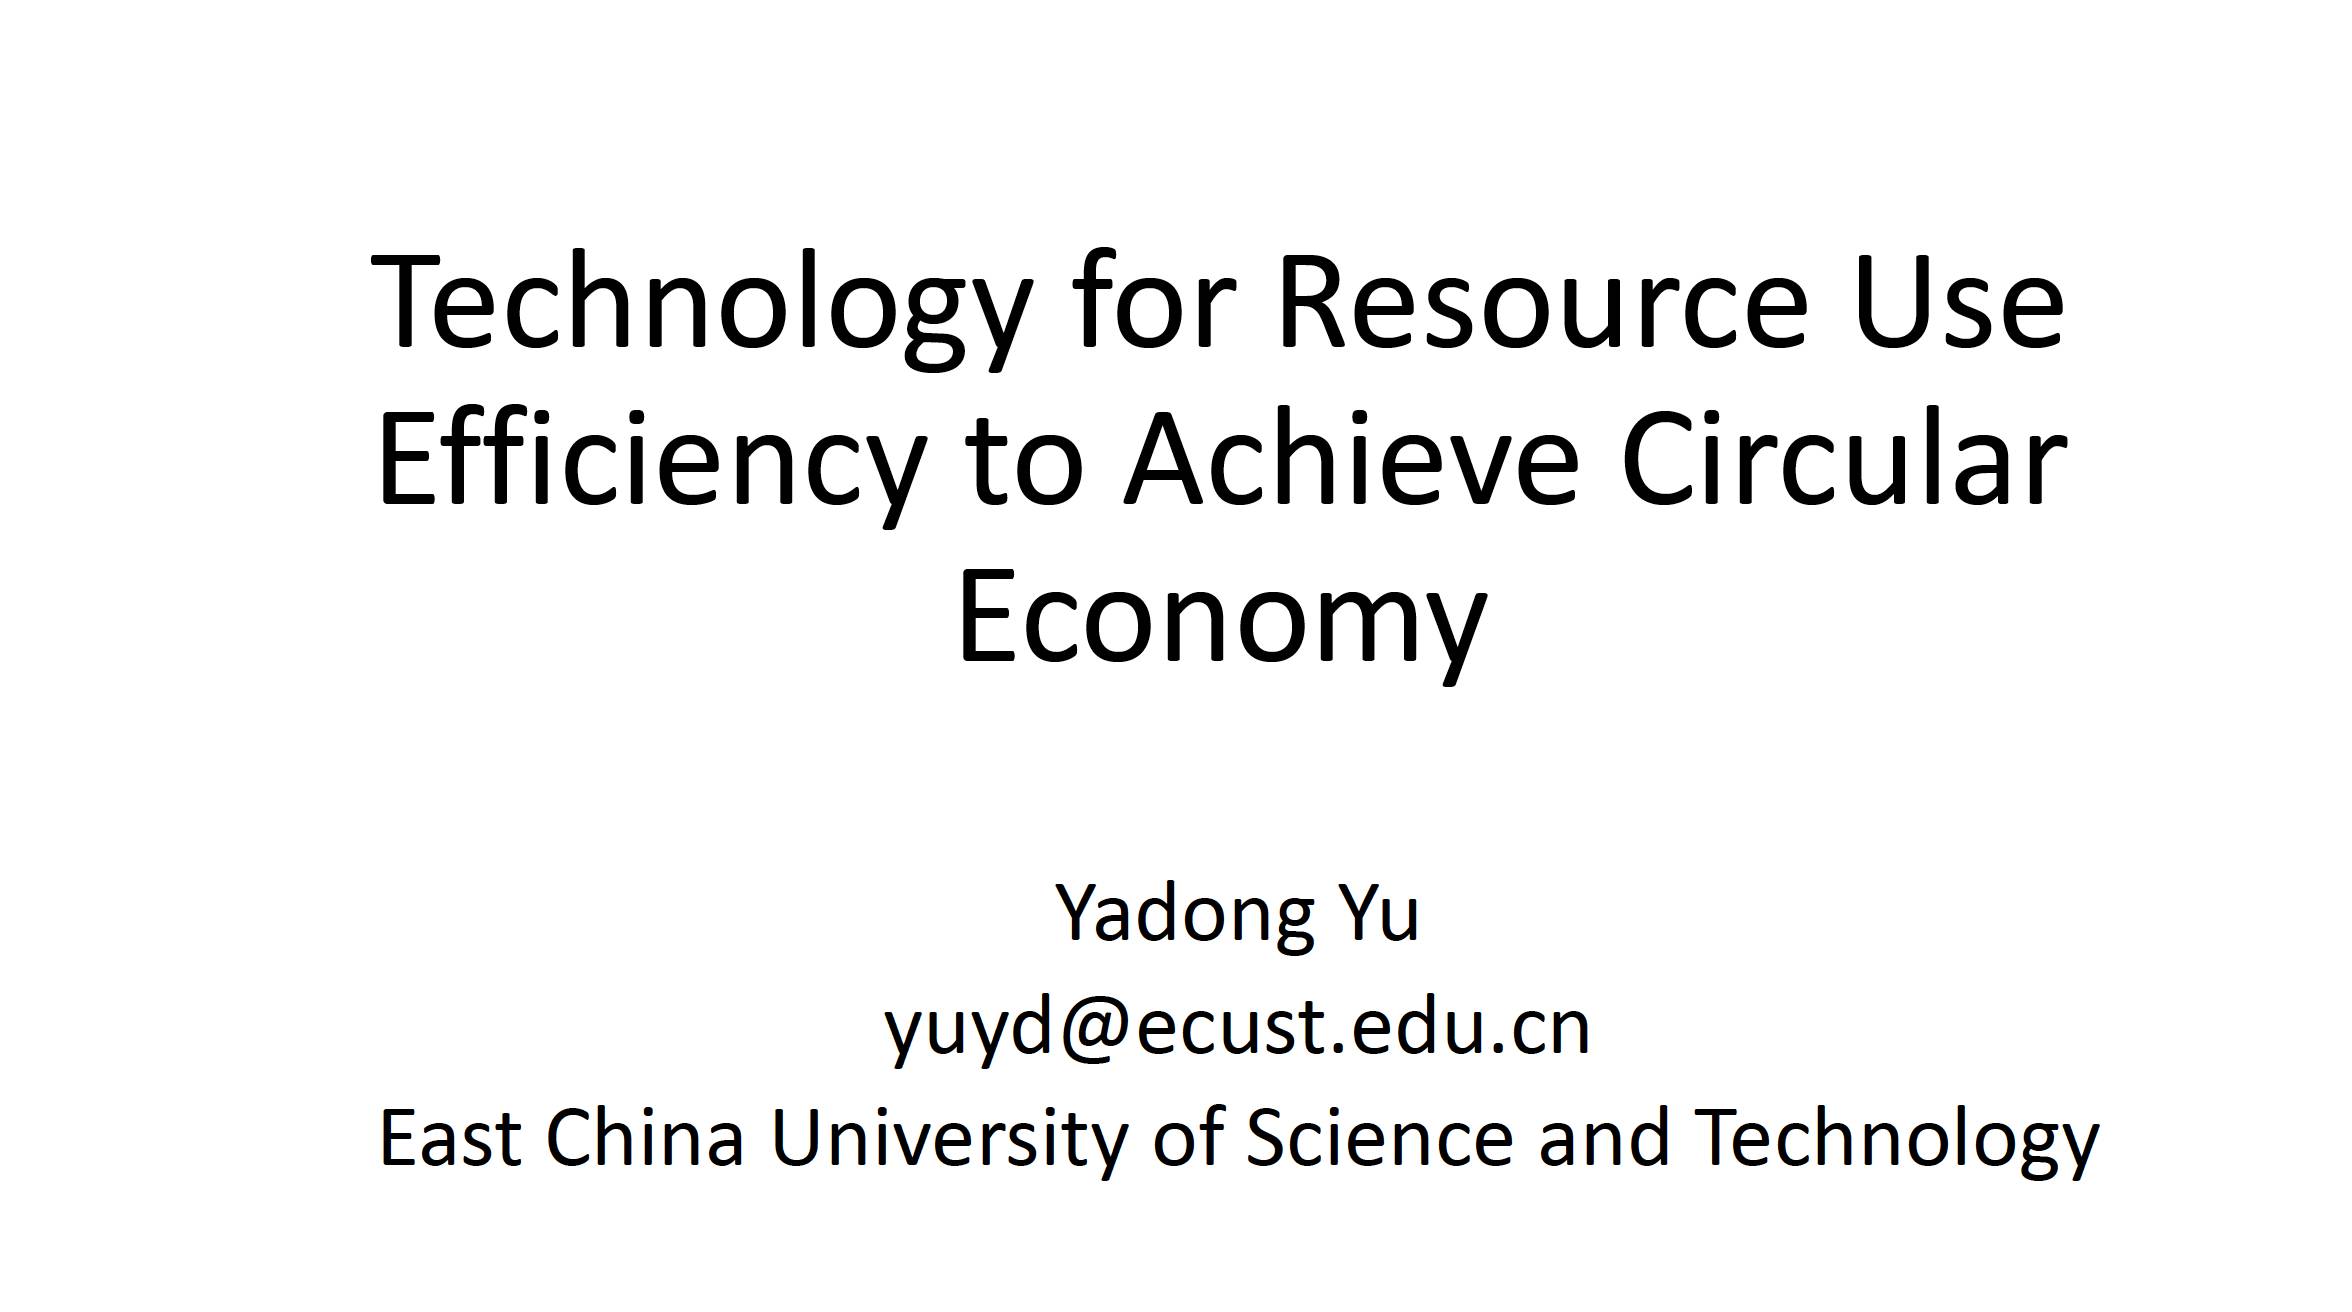 Technology for Resource Use Efficiency to Achieve Circular Economy